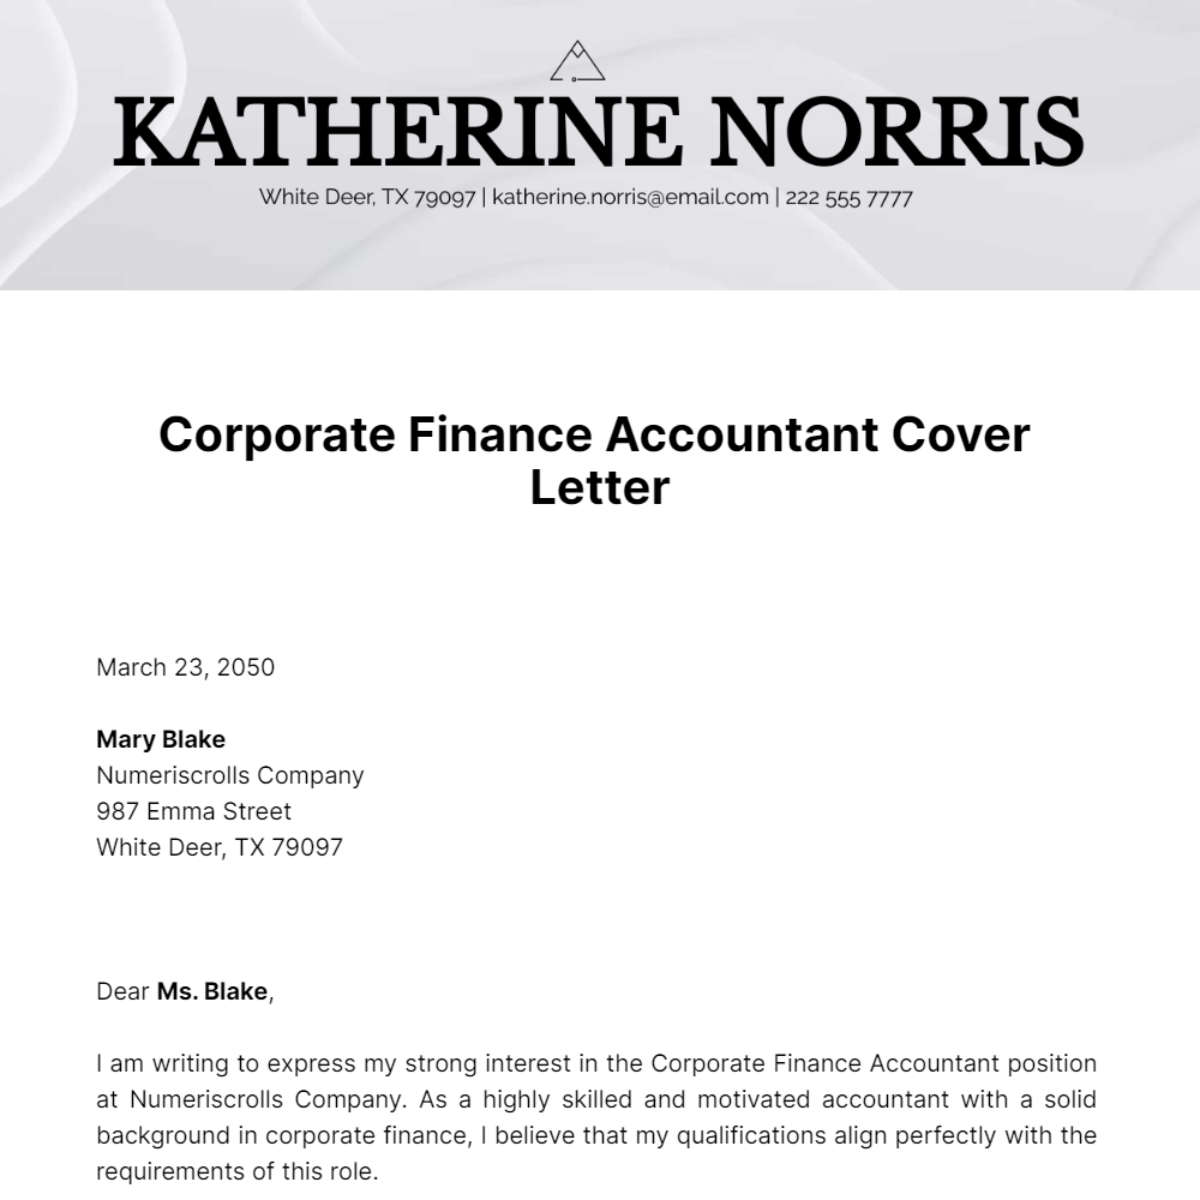 Corporate Finance Accountant Cover Letter Template